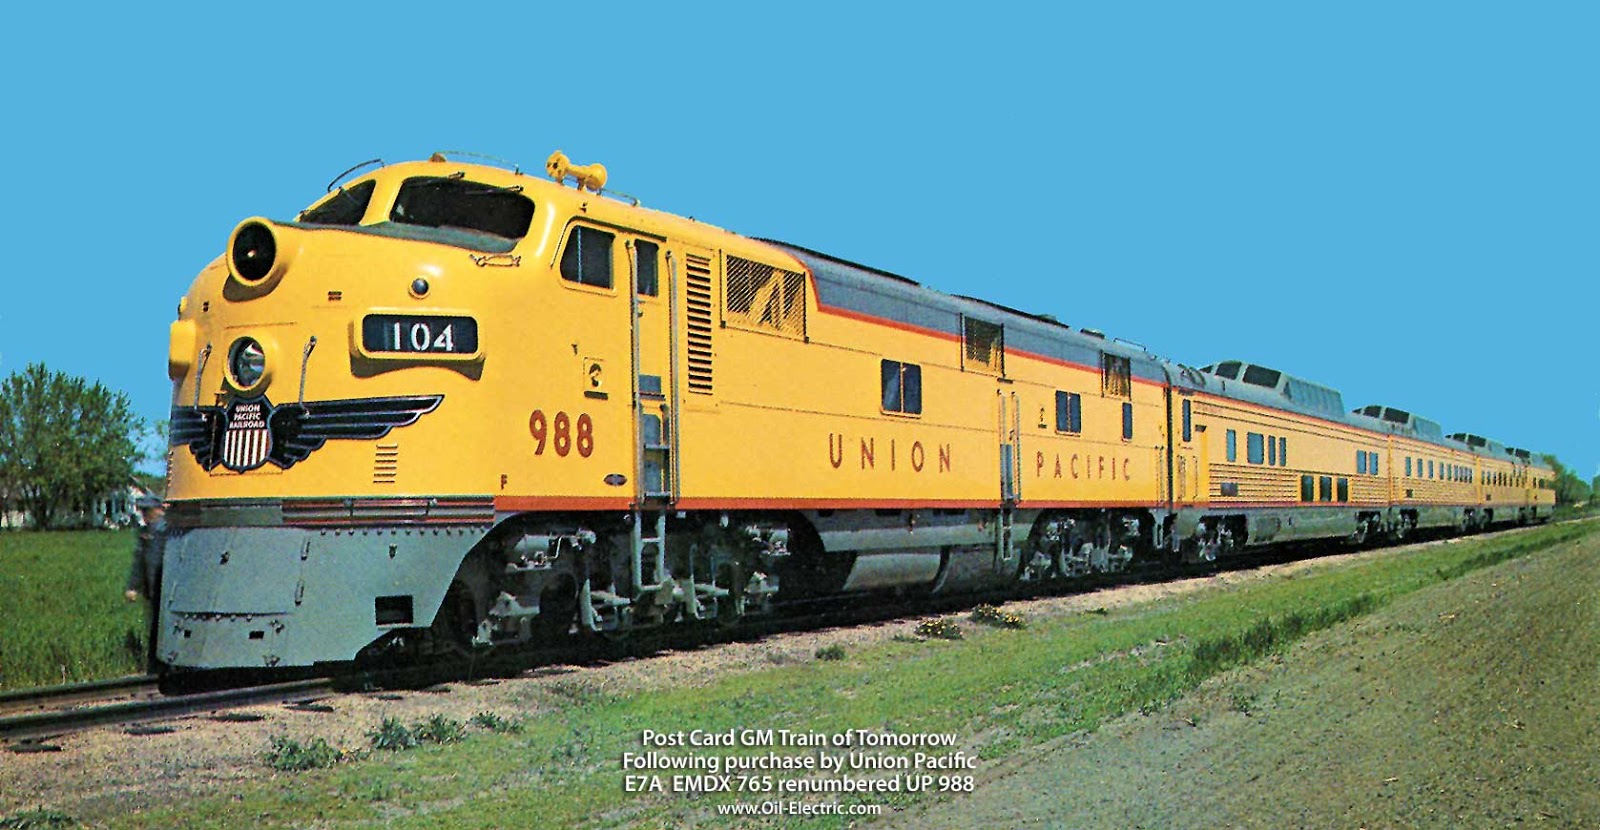 SOUTHERN PACIFIC Historic Diesels 19 1978 GE & Morrison-Knudson NEW Post Vol